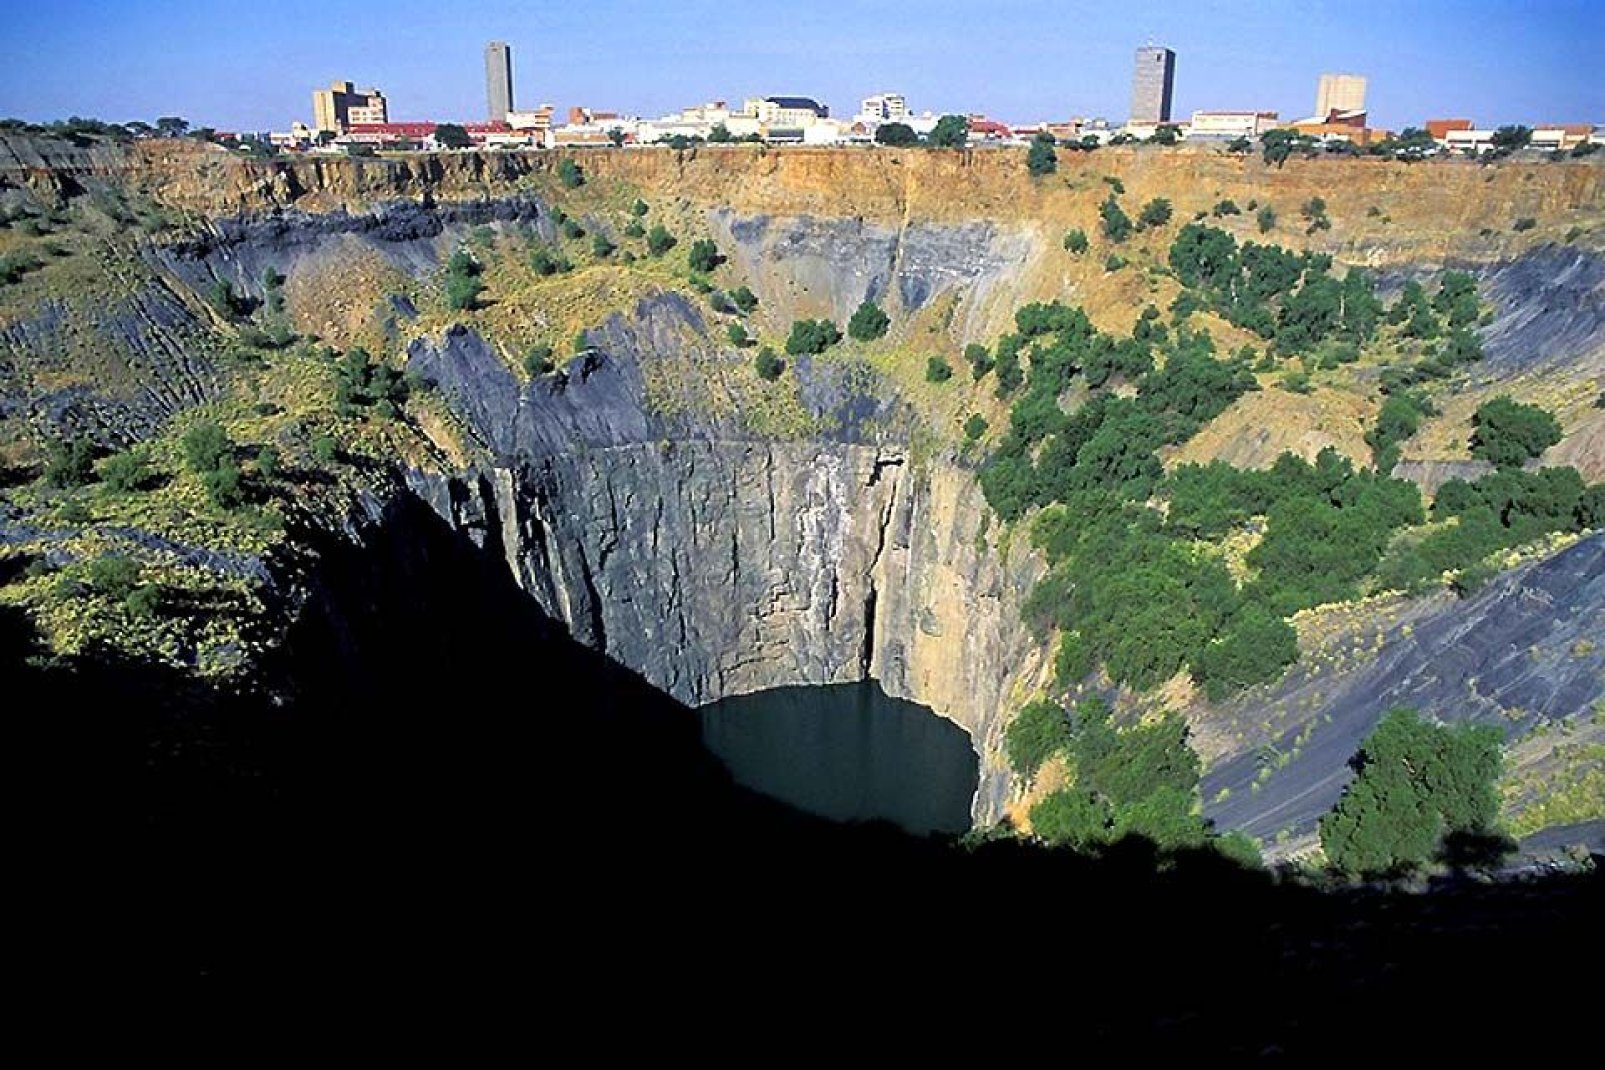 The Big Hole is a former working mine in Kimberley. The Eureka diamond was discovered by a child in the 19th century, evoking a real infatuation with the mineral.